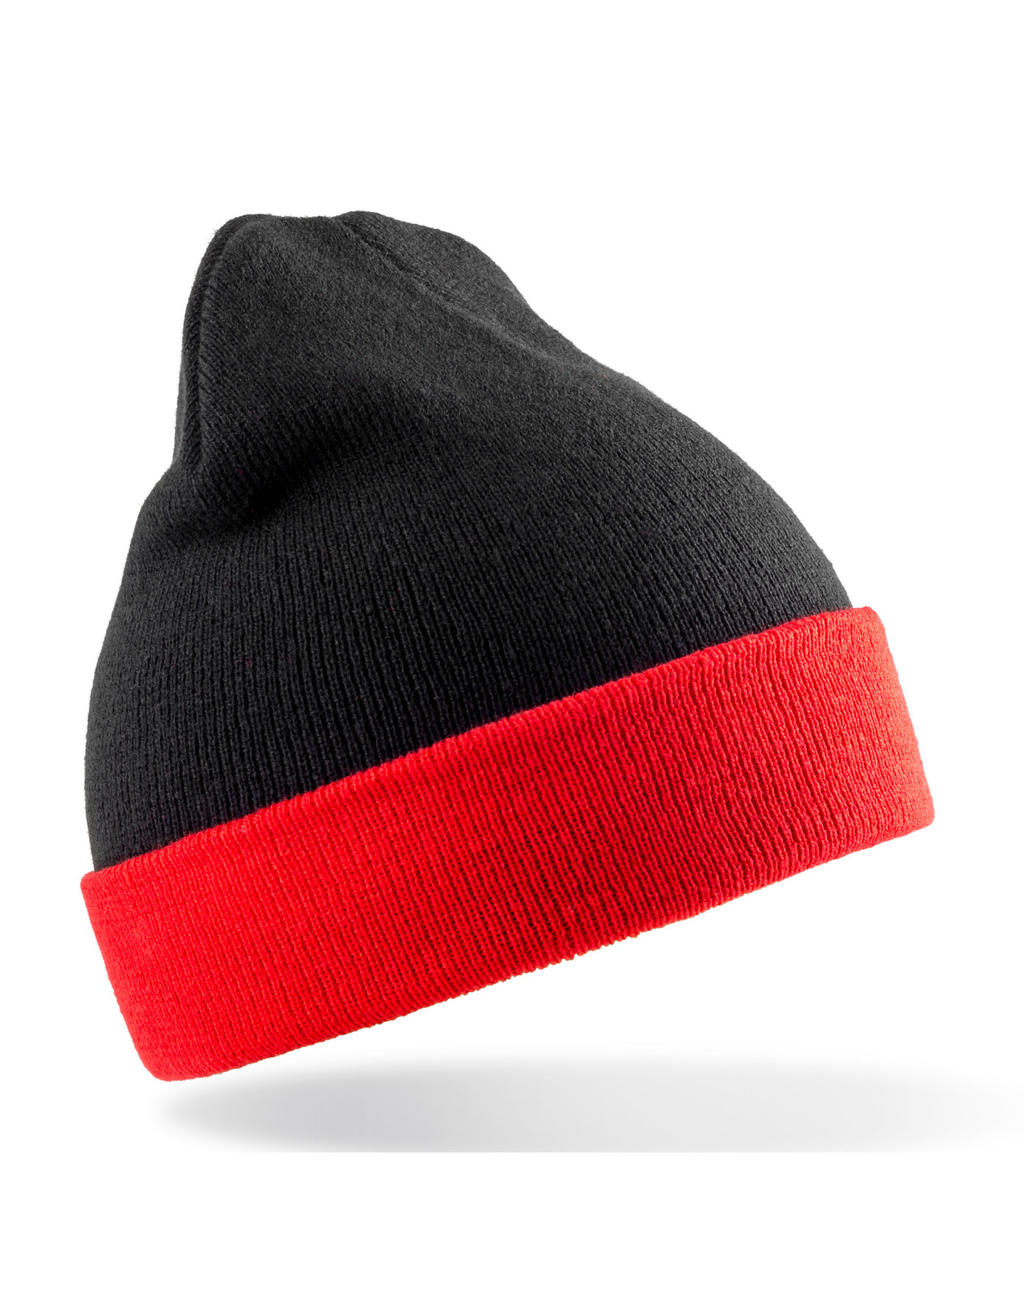  Recycled Black Compass Beanie in Farbe Black/Red